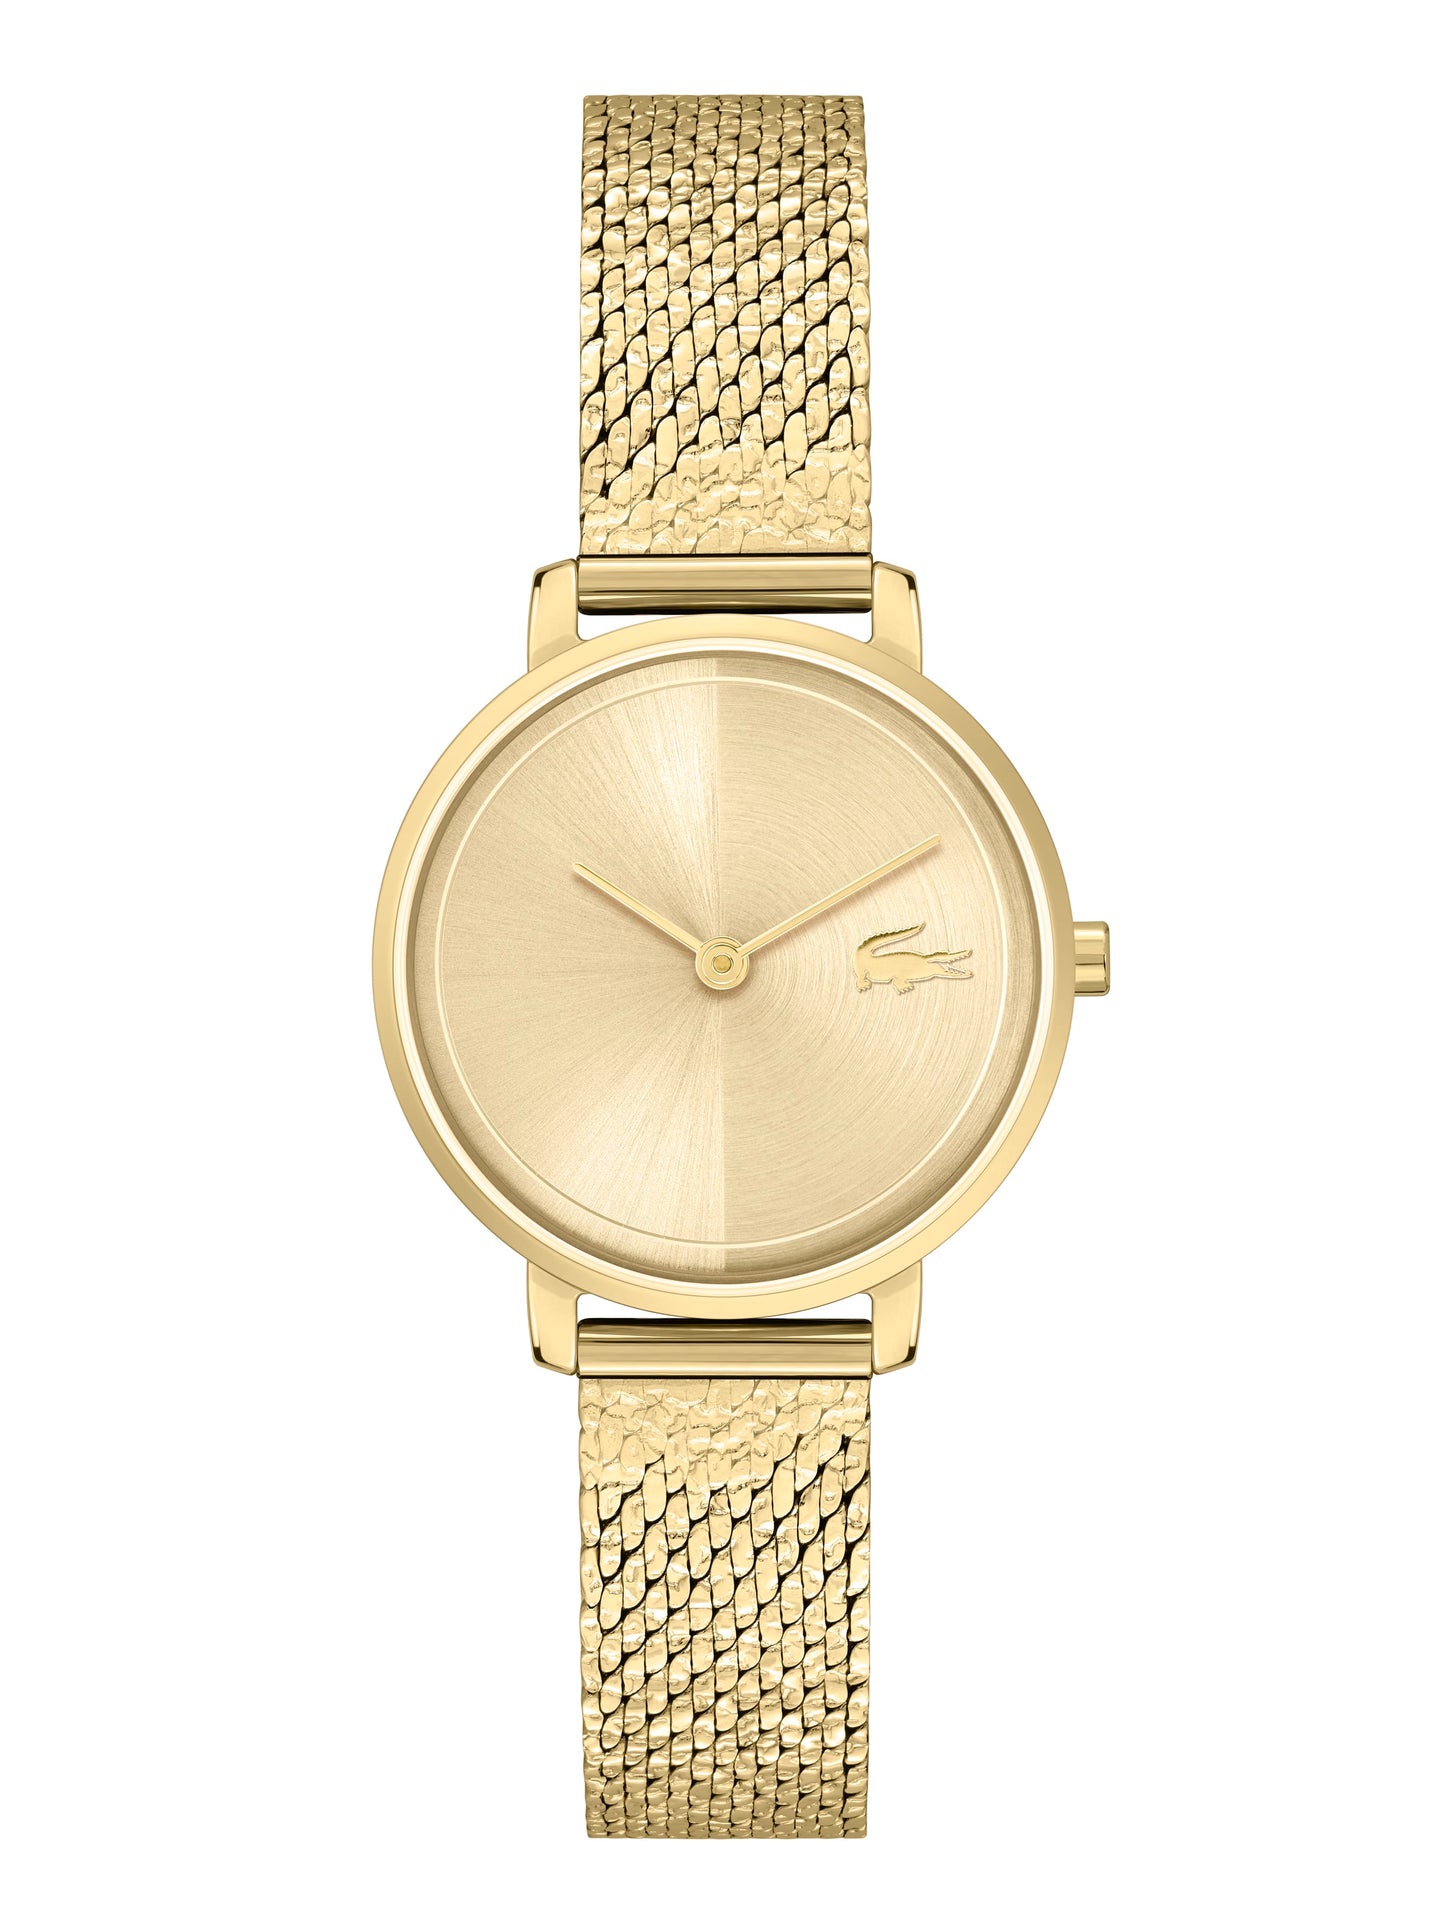 A Ladies Suzanne Yellow Gold IP Watch 2001297 with a mesh band, complemented by Lacoste's iconic crocodile emblem.